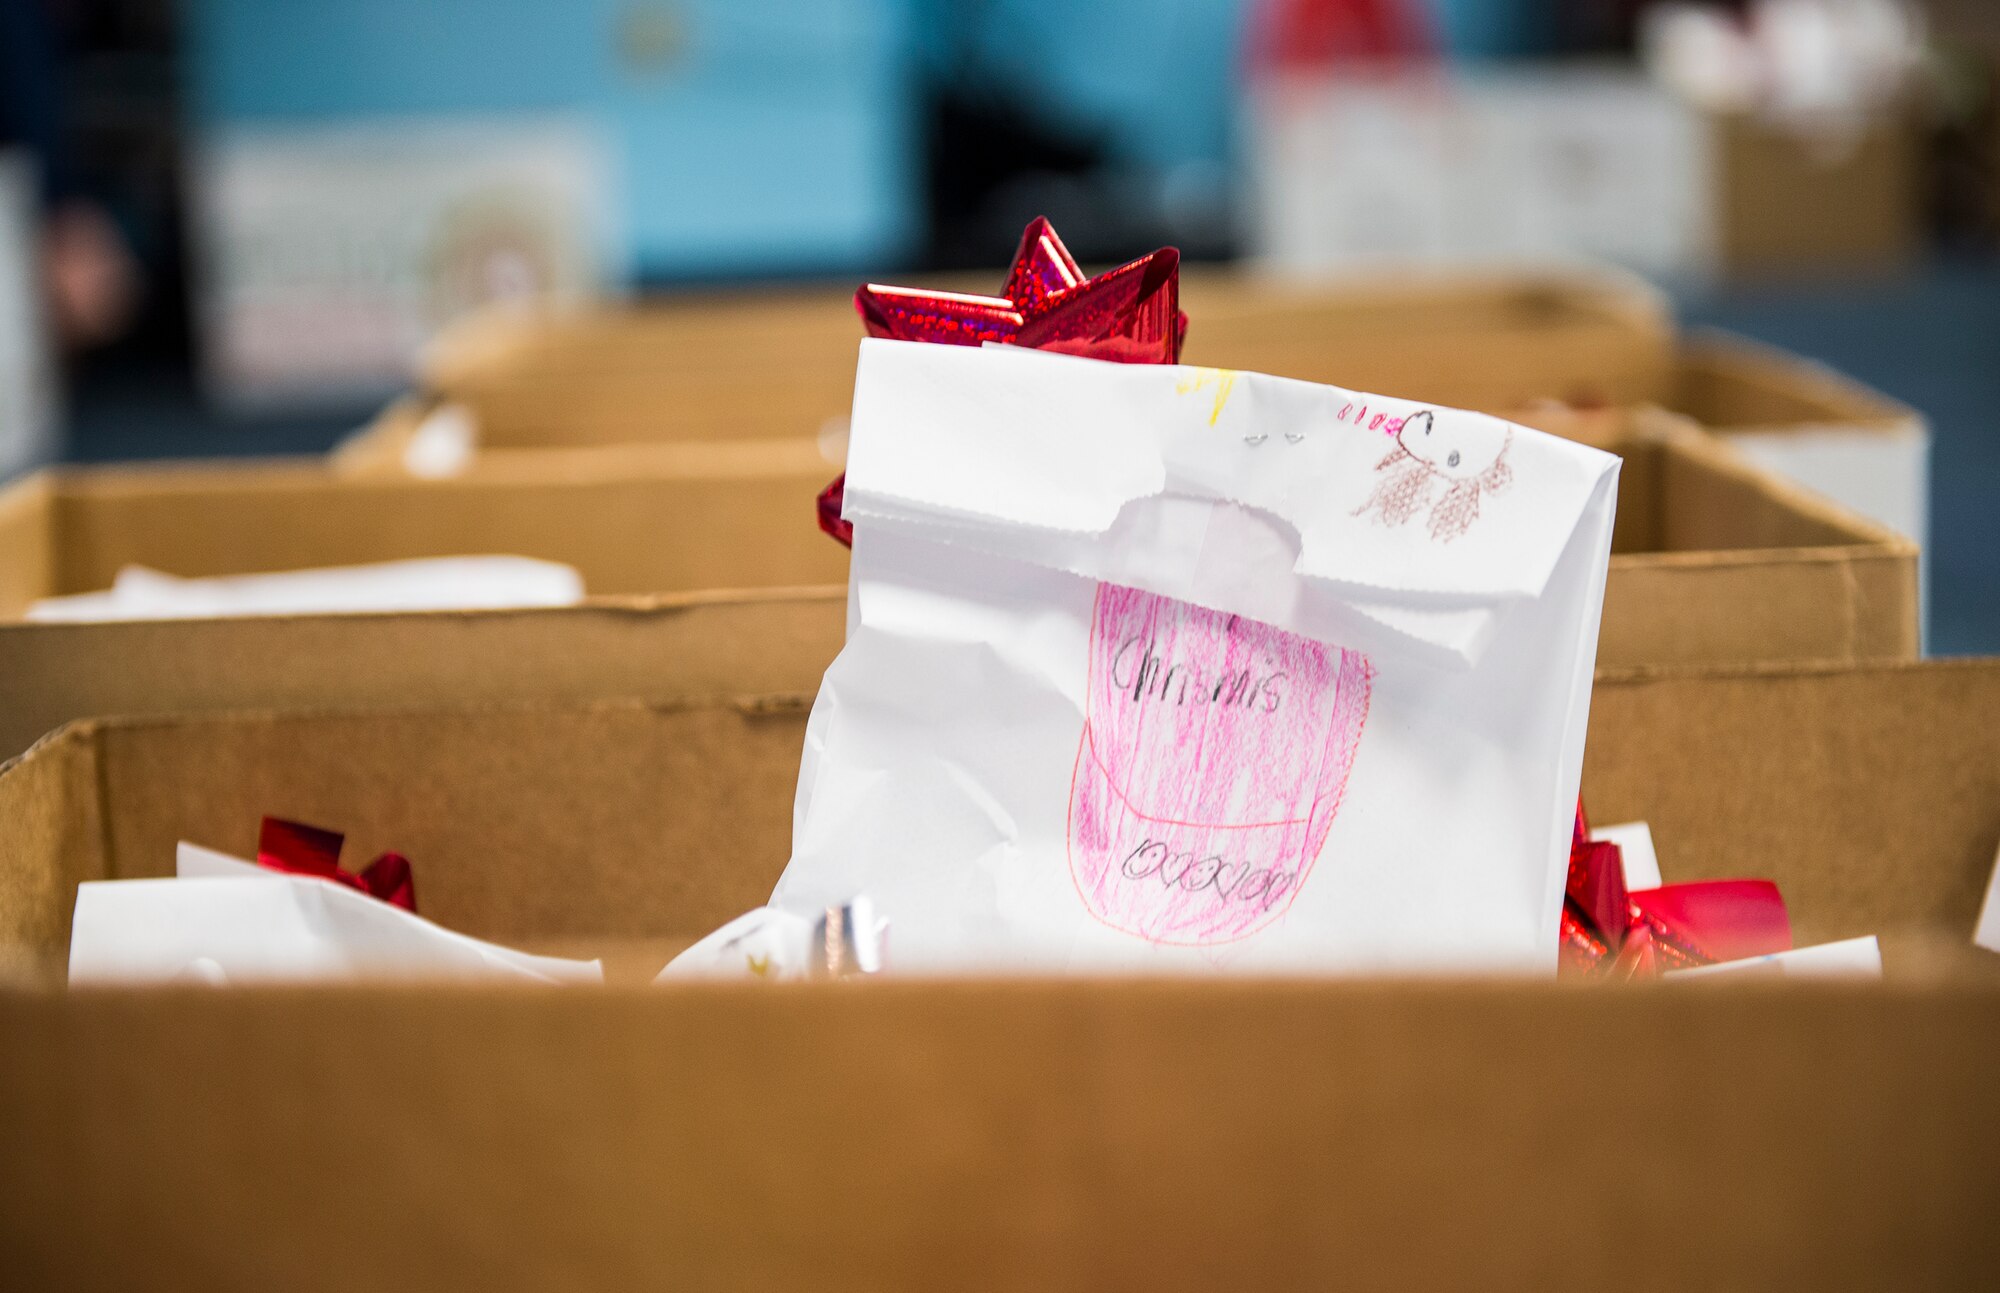 A single bag of cookies waits to be delivered during the Annual Airmen’s Cookie Drive, Dec. 2, 2015, at Moody Air Force Base, Ga. Local organizations, Airmen and spouses donated more than 8,400 cookies for Moody’s dorm residents and approximately 635 bags were distributed. (U.S. Air Force photo by Senior Airman Ceaira Tinsley/Released)